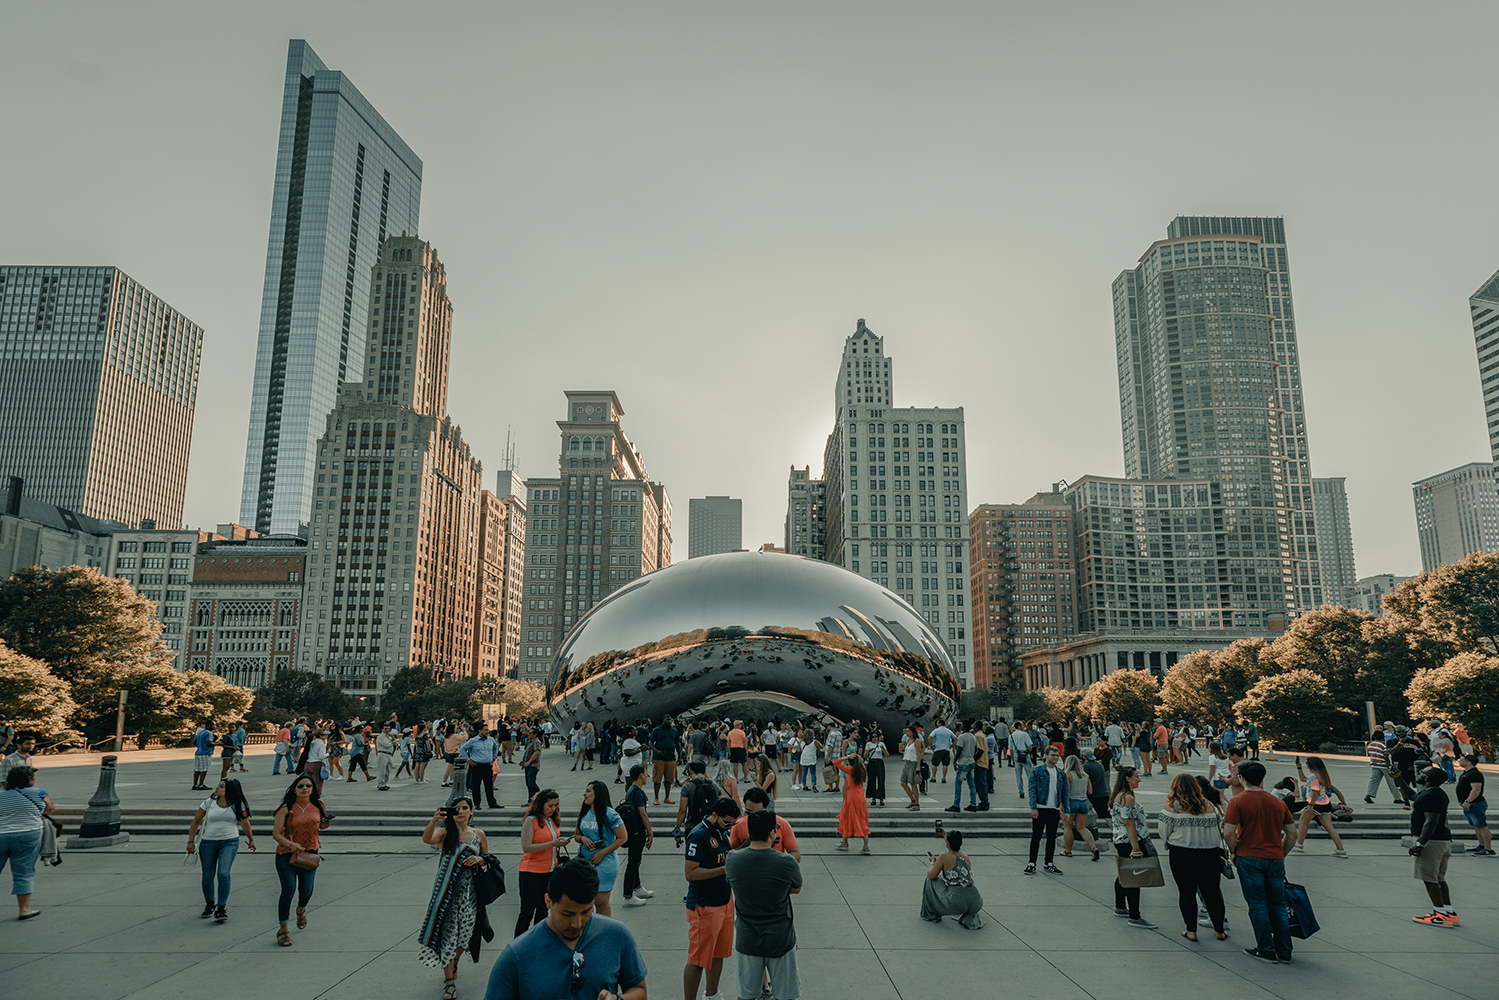 Chicago's Bean surrounded by people and buildings